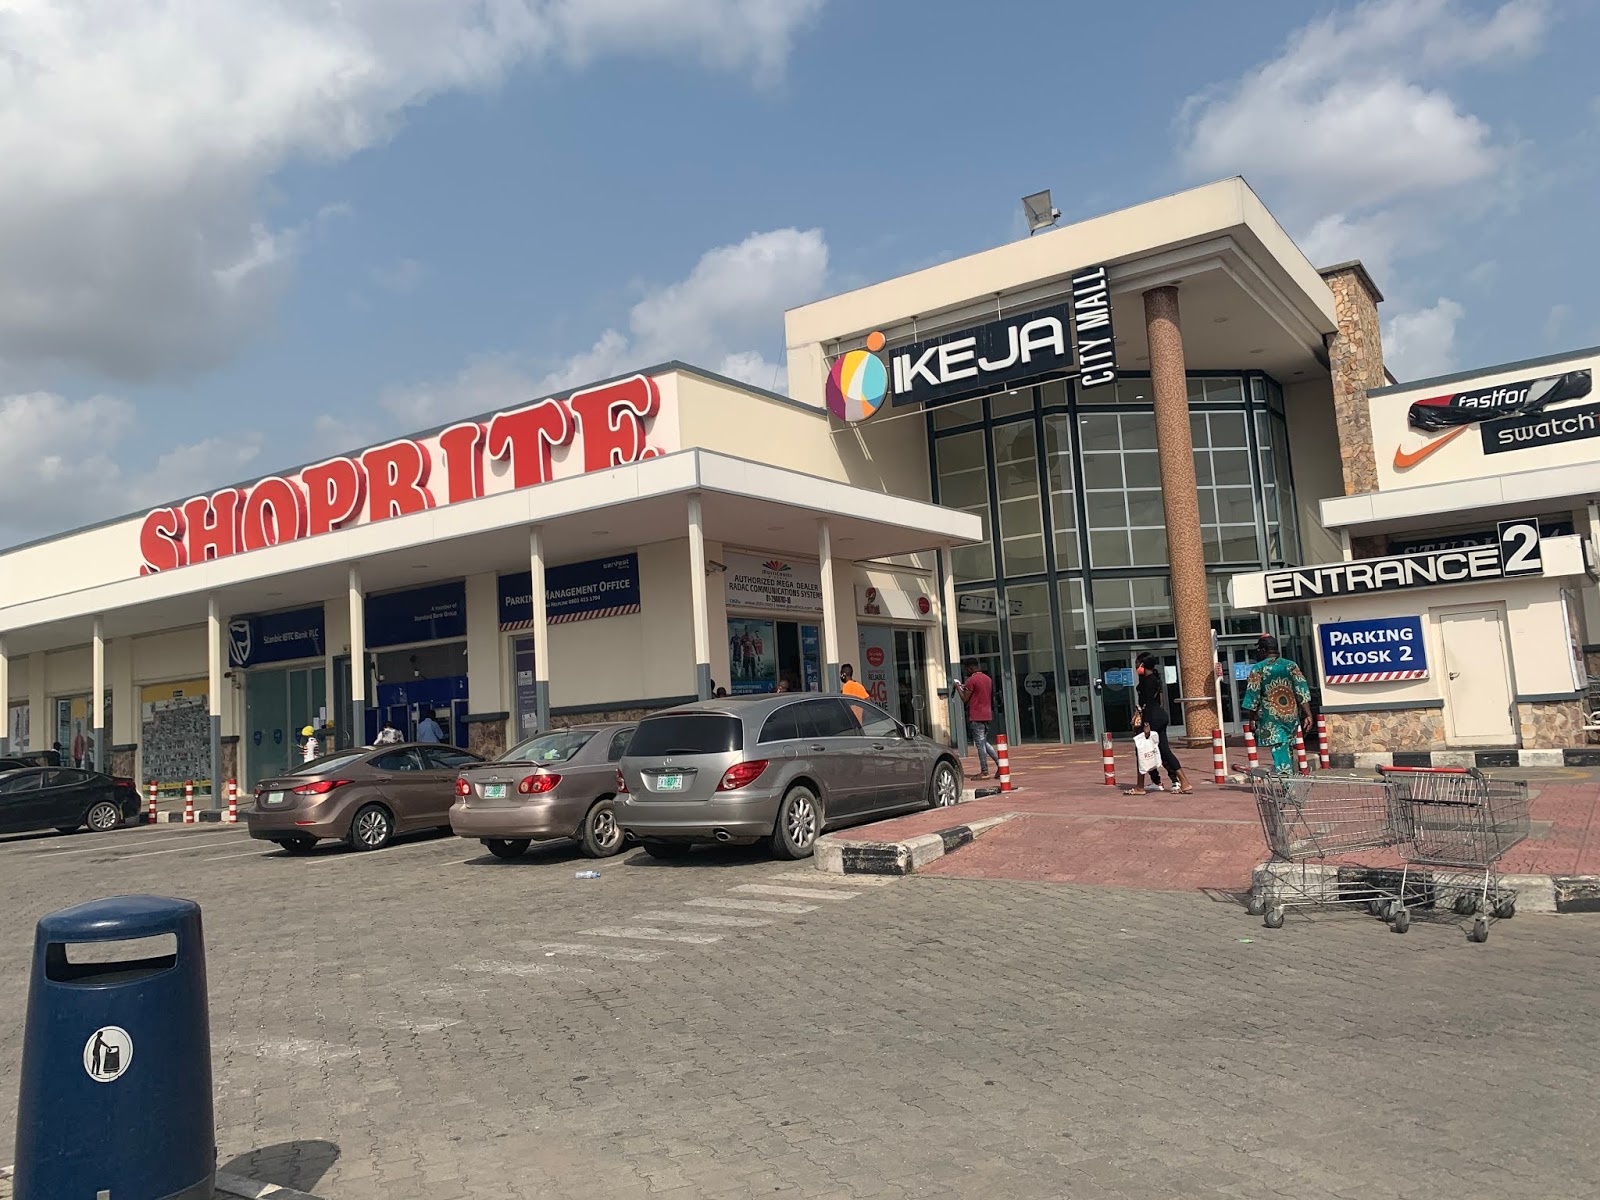 Nigeria Retail - The Exit Of A Giant